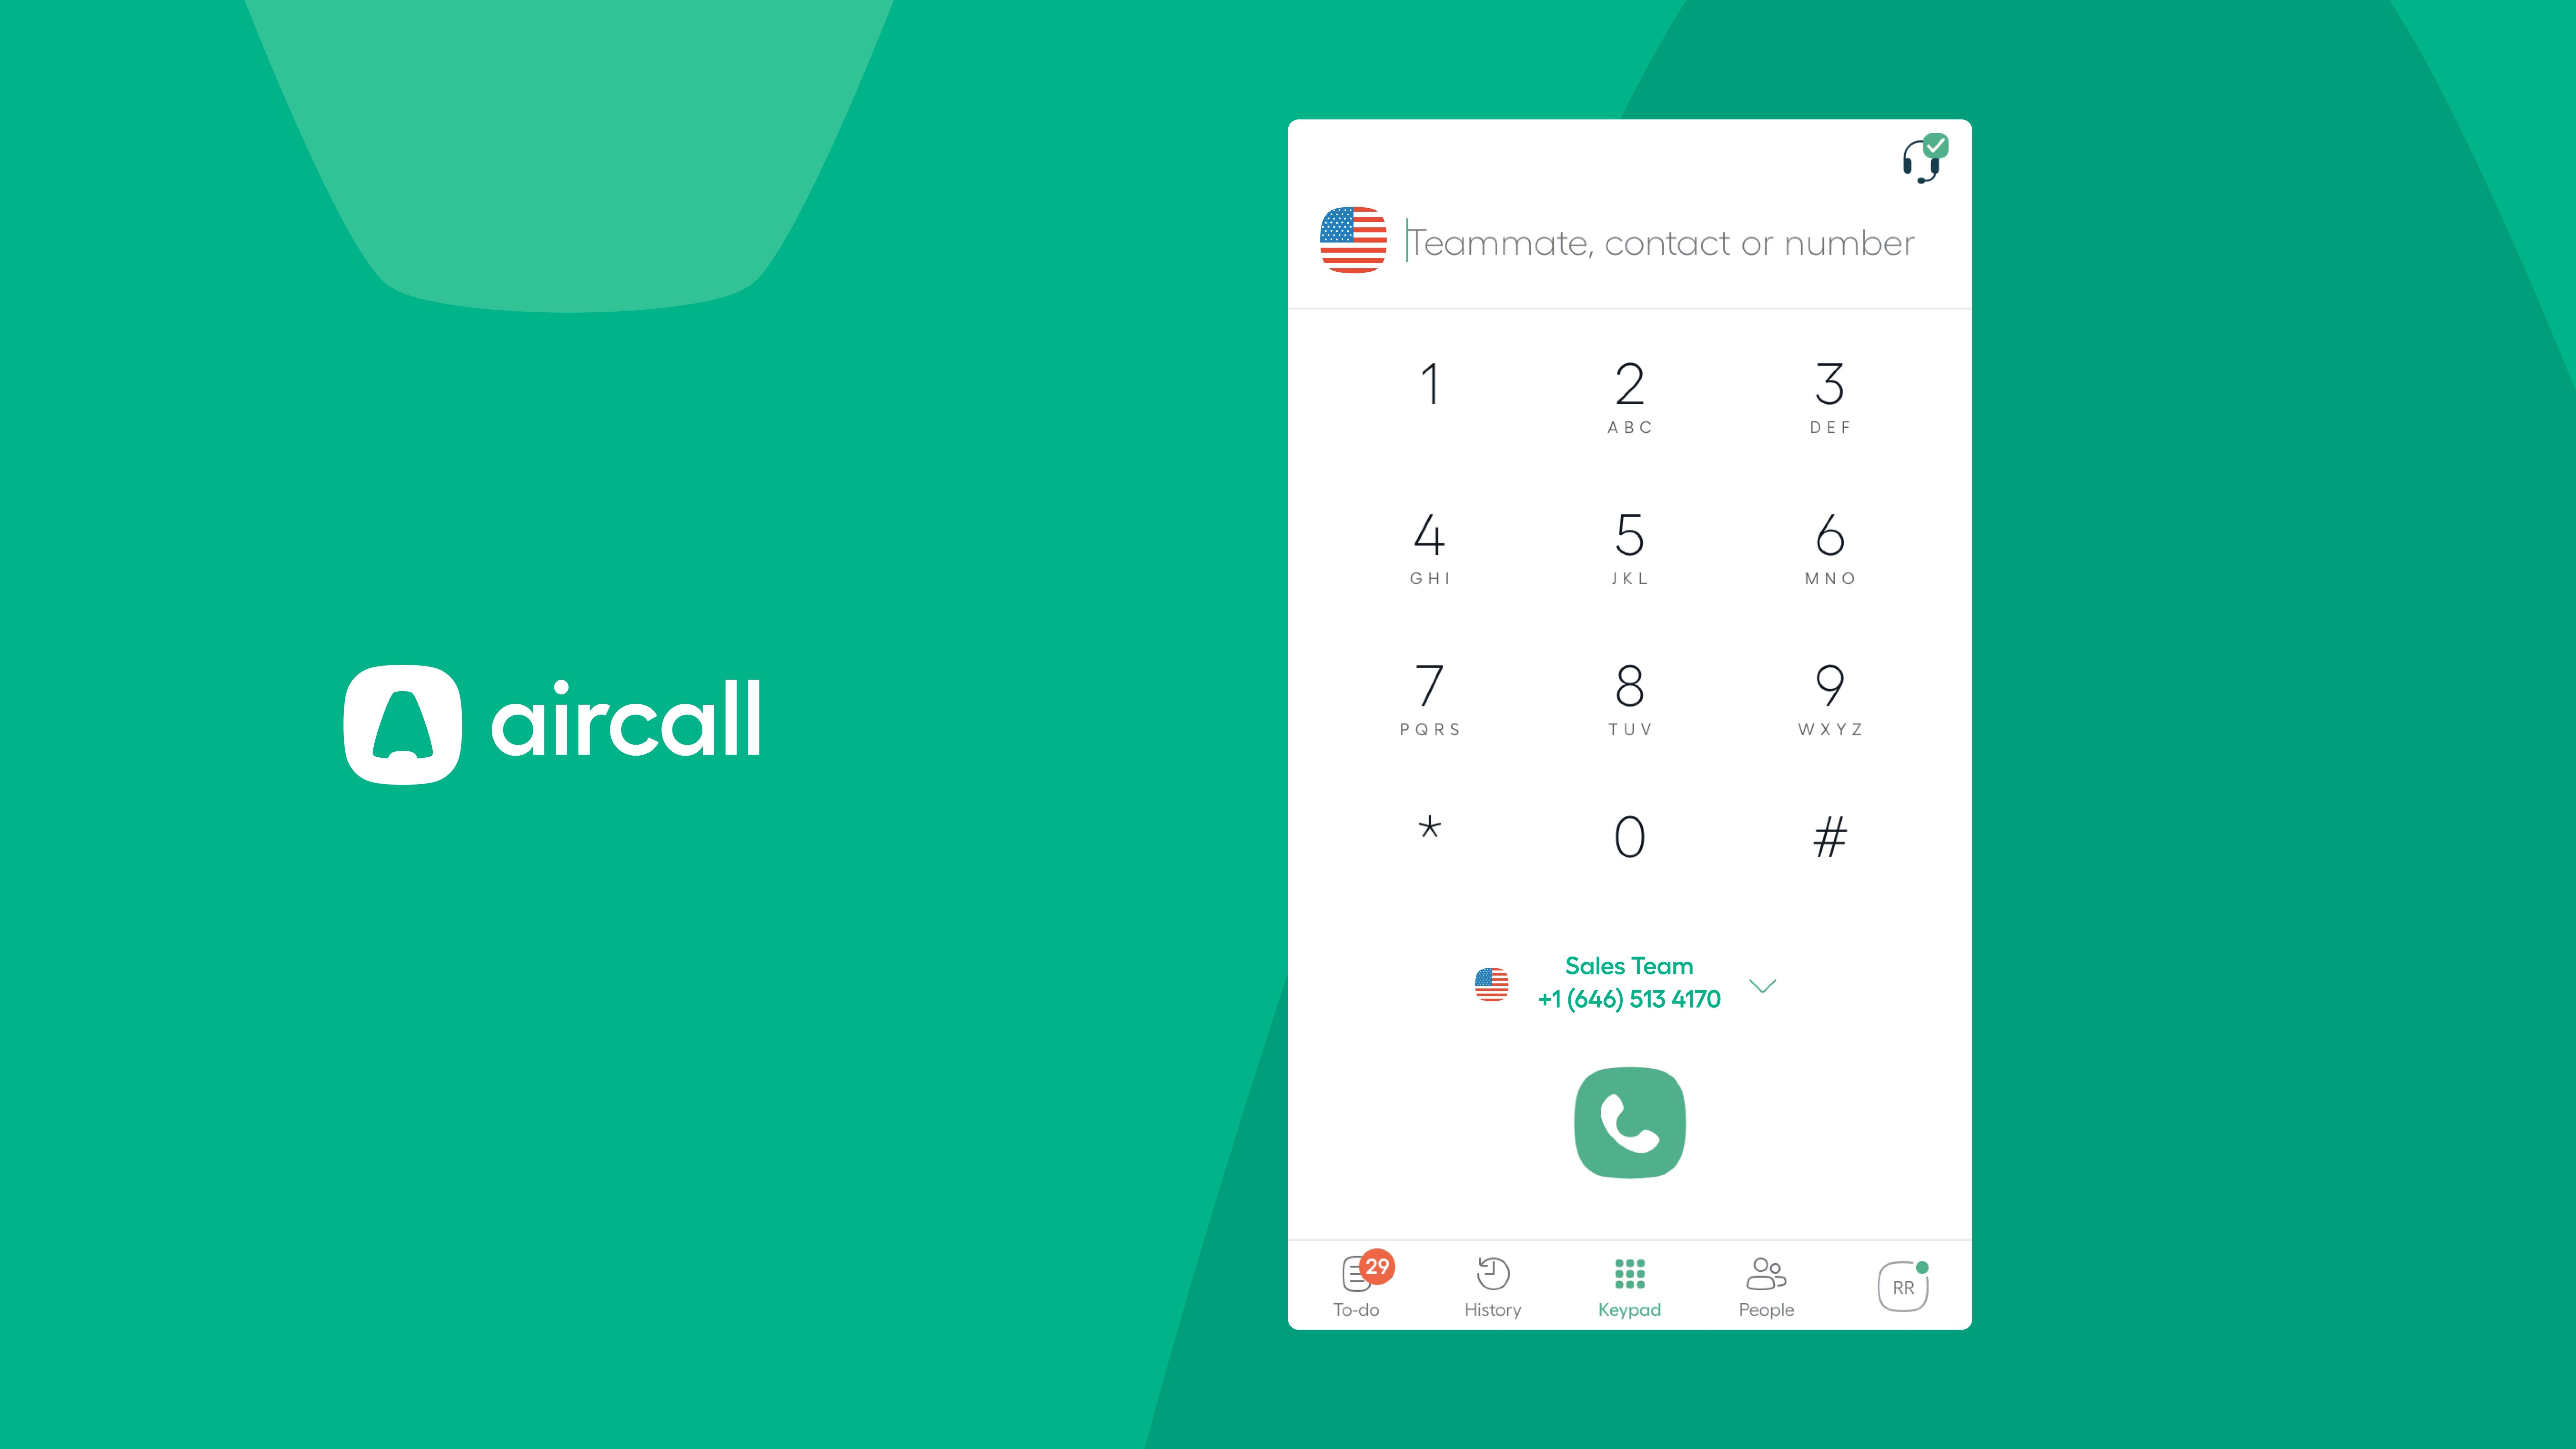 Make and receive calls on international numbers